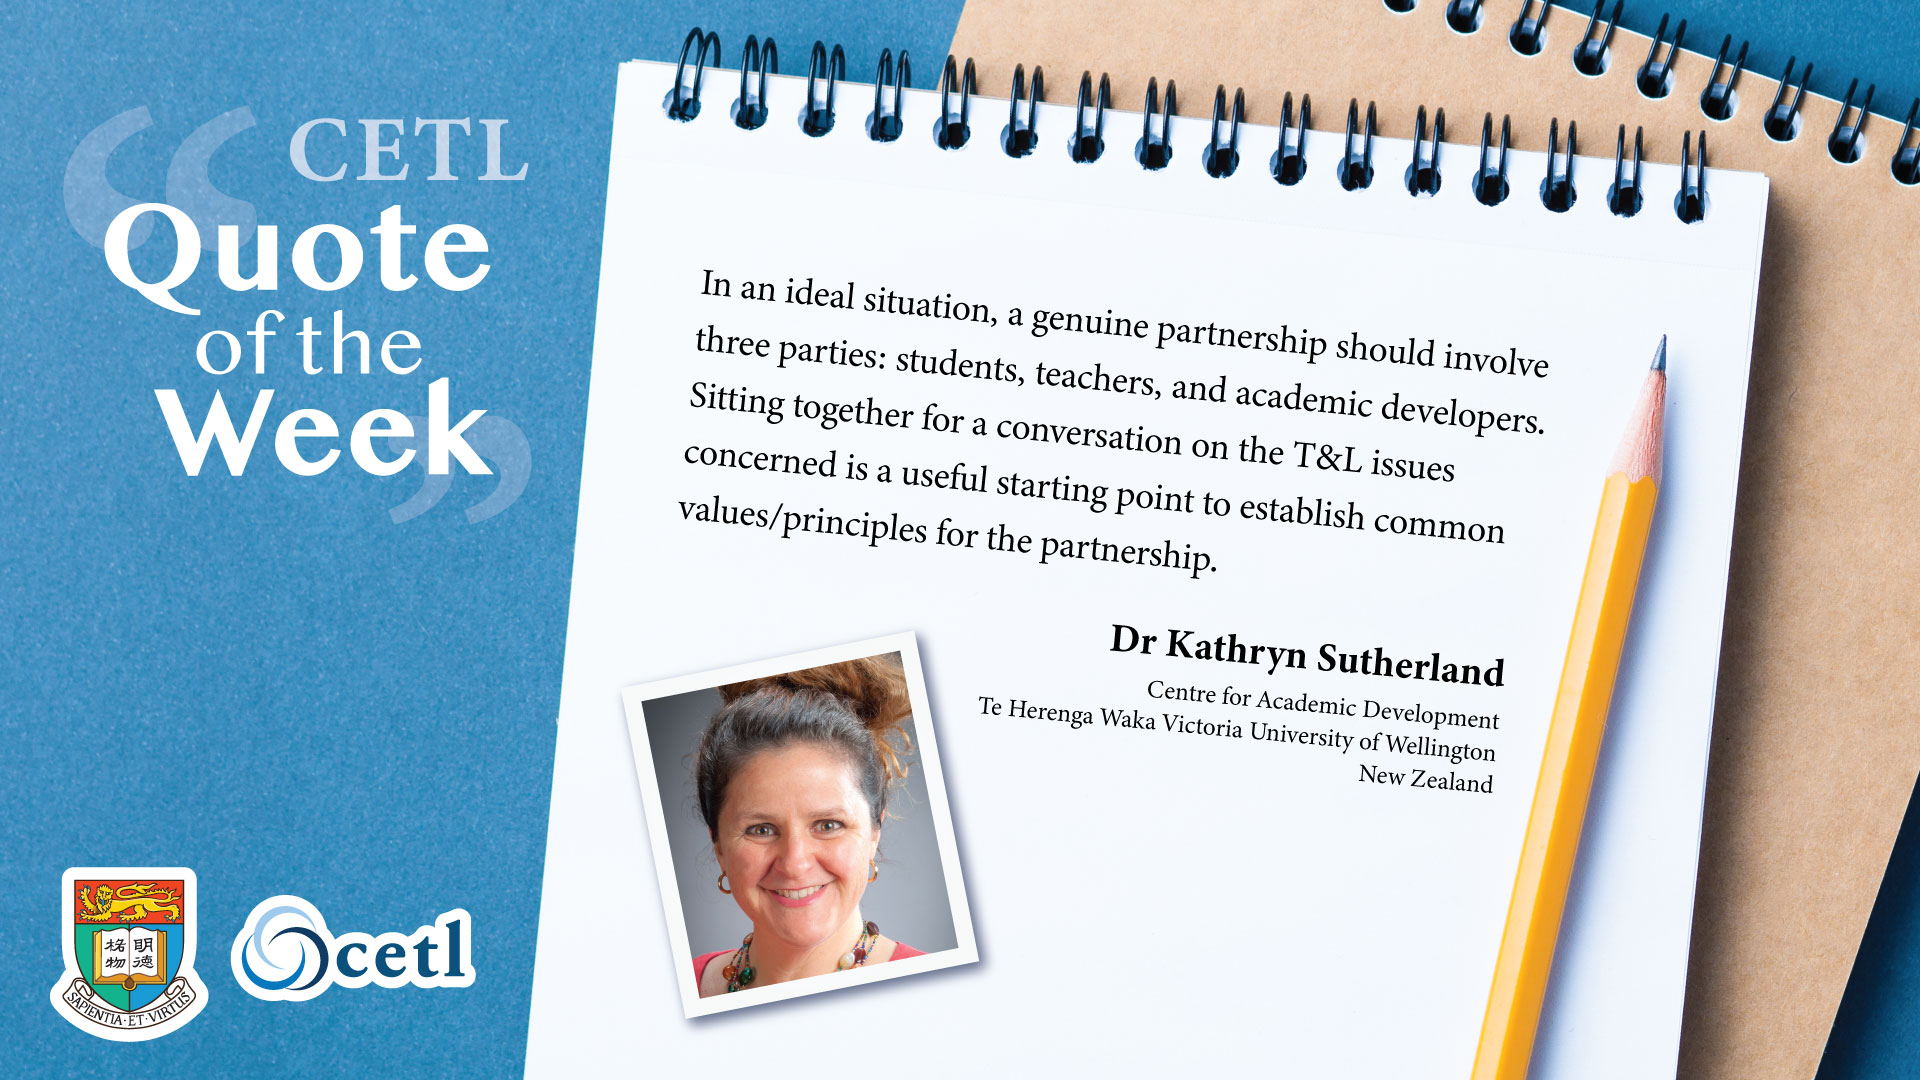 Dr. Kathryn Sutherland - In an ideal situation, a genuine partnership should involve three parties: students, teachers, and academic developers. Sitting together for a conversation on the T&L issues concerned is a useful starting point to establish common values/principles for the partnership.